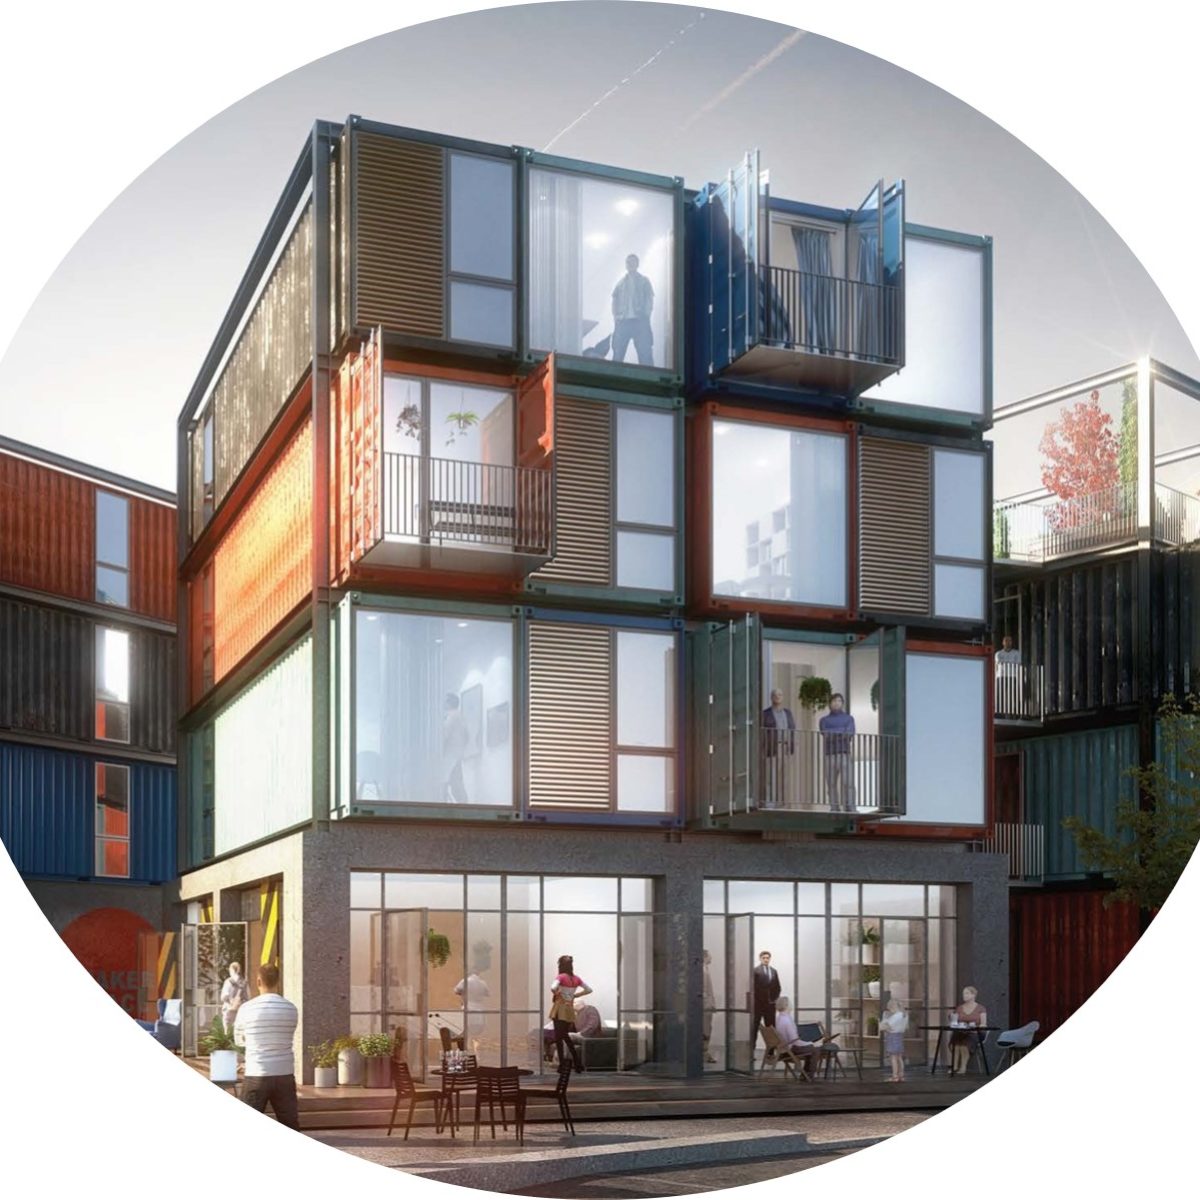 Shipping Container Housing Housing Innovation Collaborative